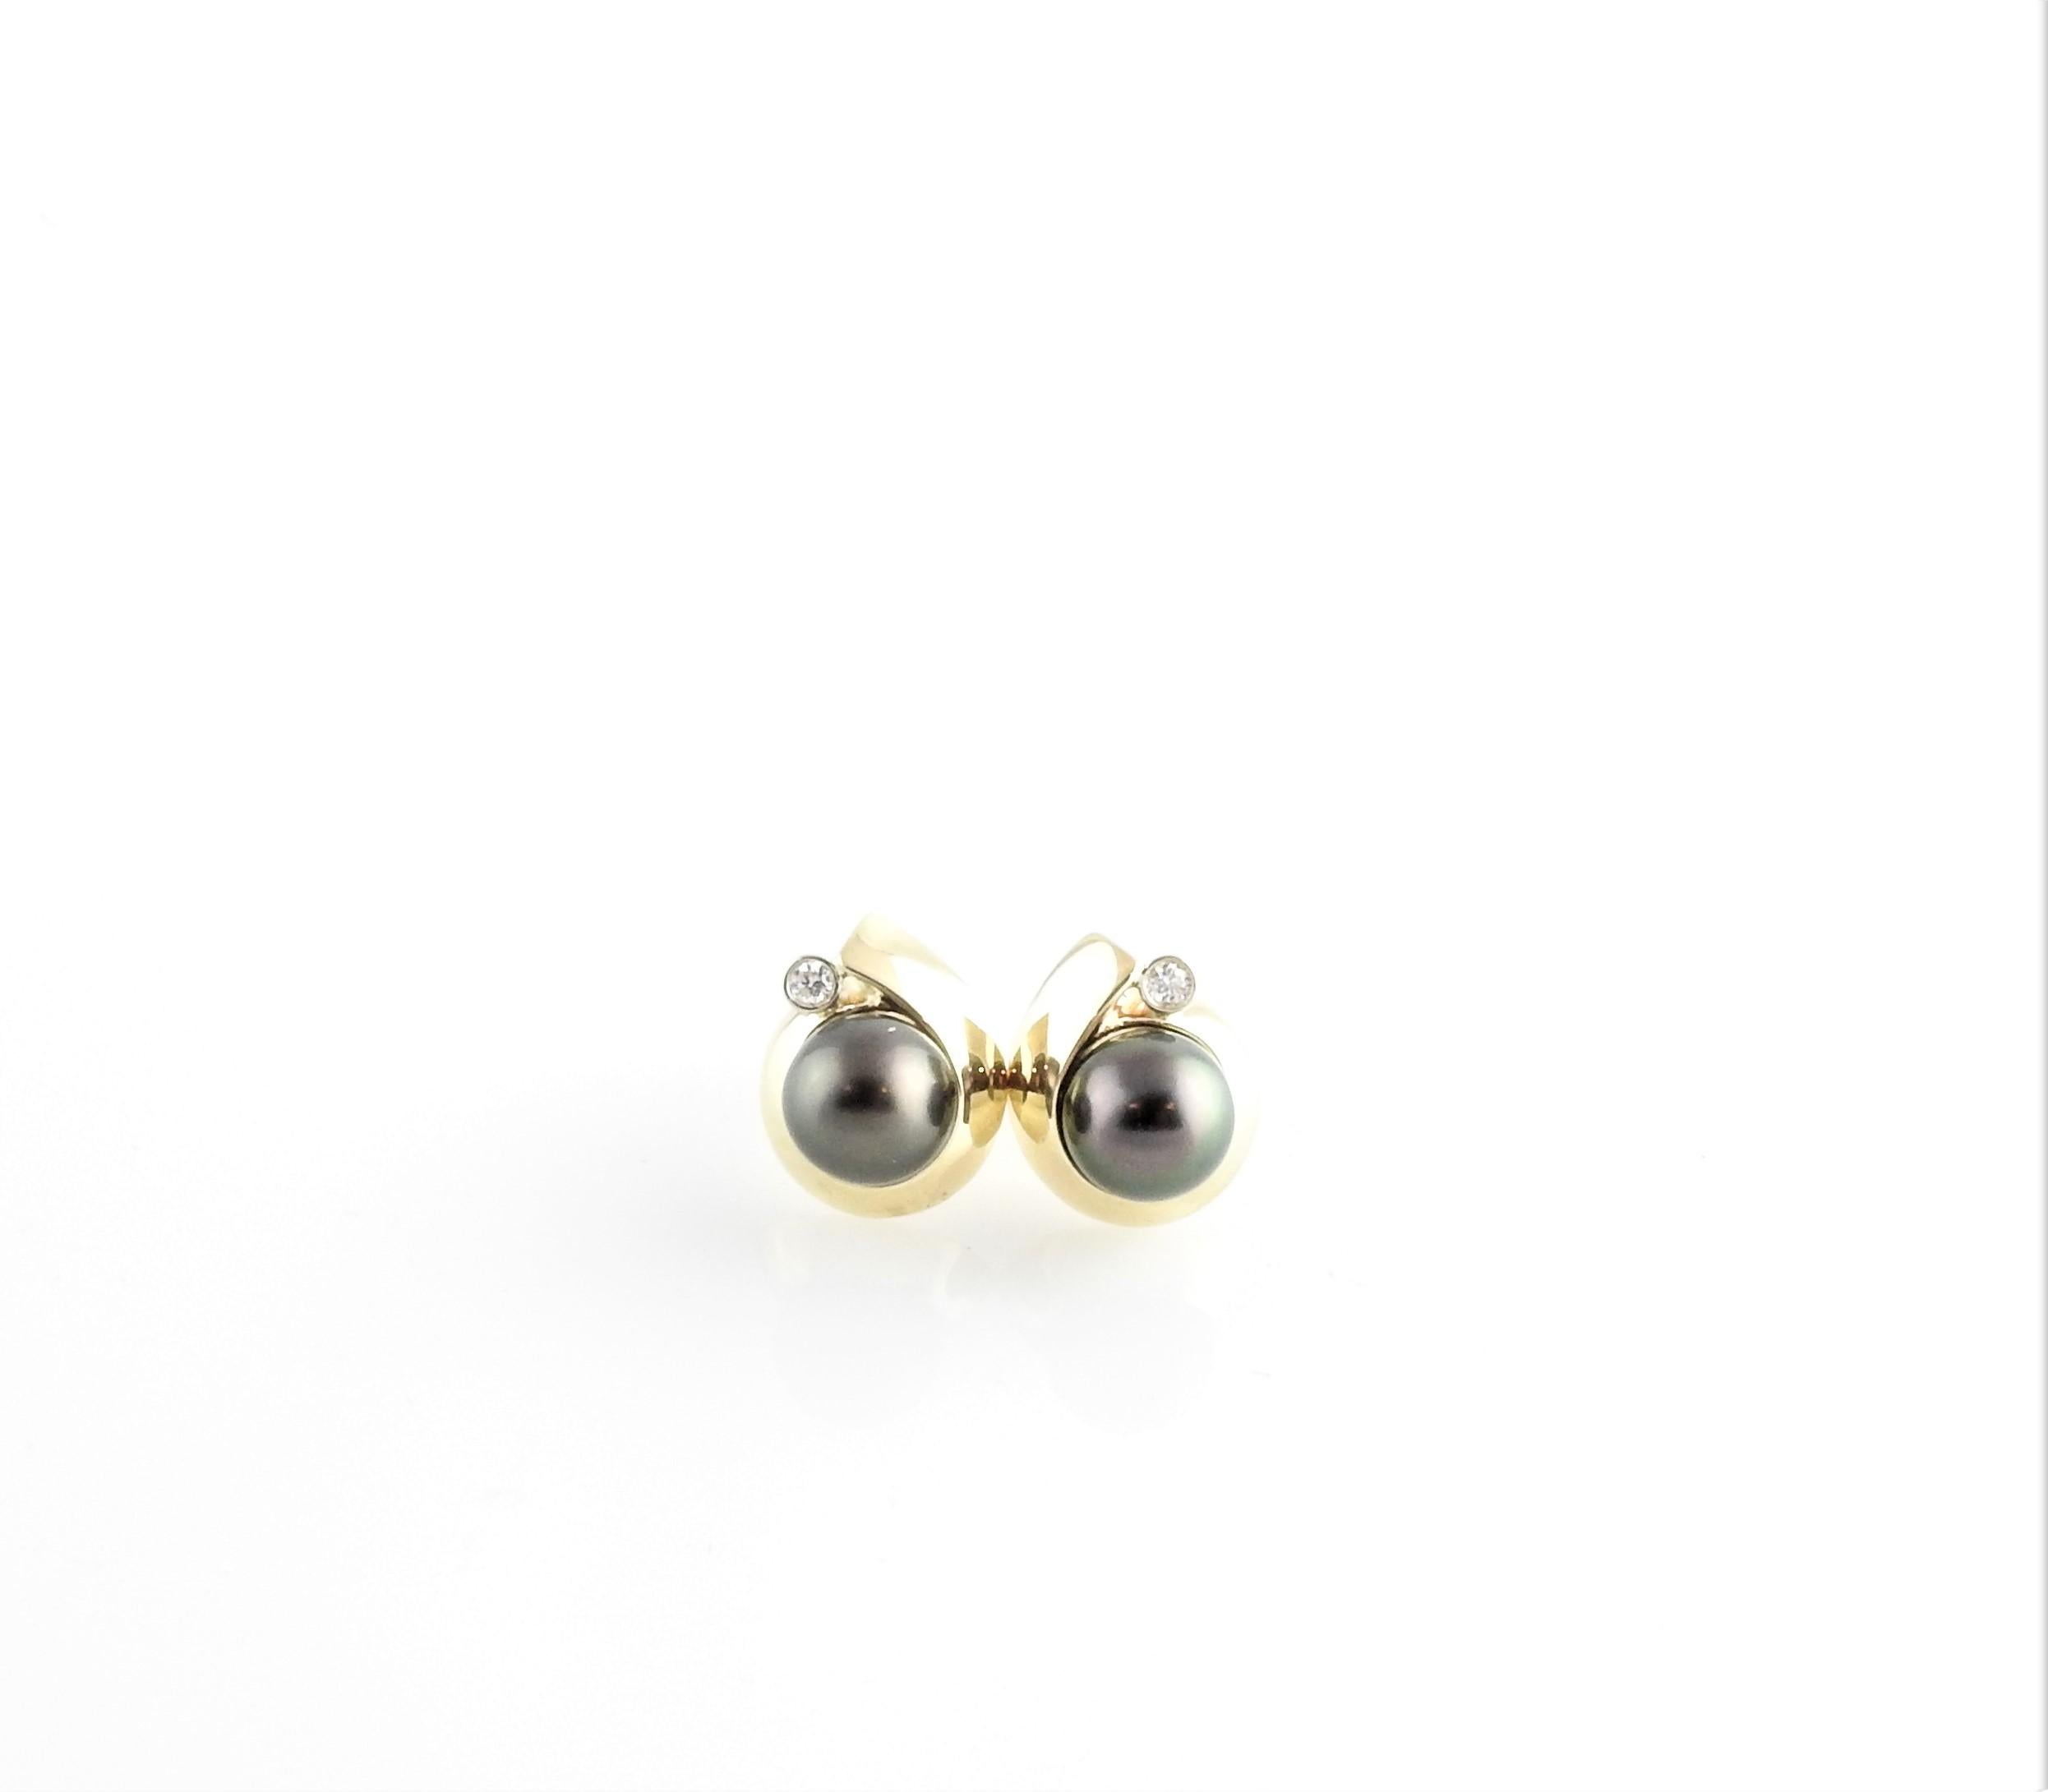 Vintage 14 Karat Yellow Gold Black Pearl and Diamond Earrings

These stunning stud earrings each feature one 9 mm black pearl and one round brilliant cut diamond set in beautifully detailed 14K yellow gold.

Approximate total diamond weight: .10